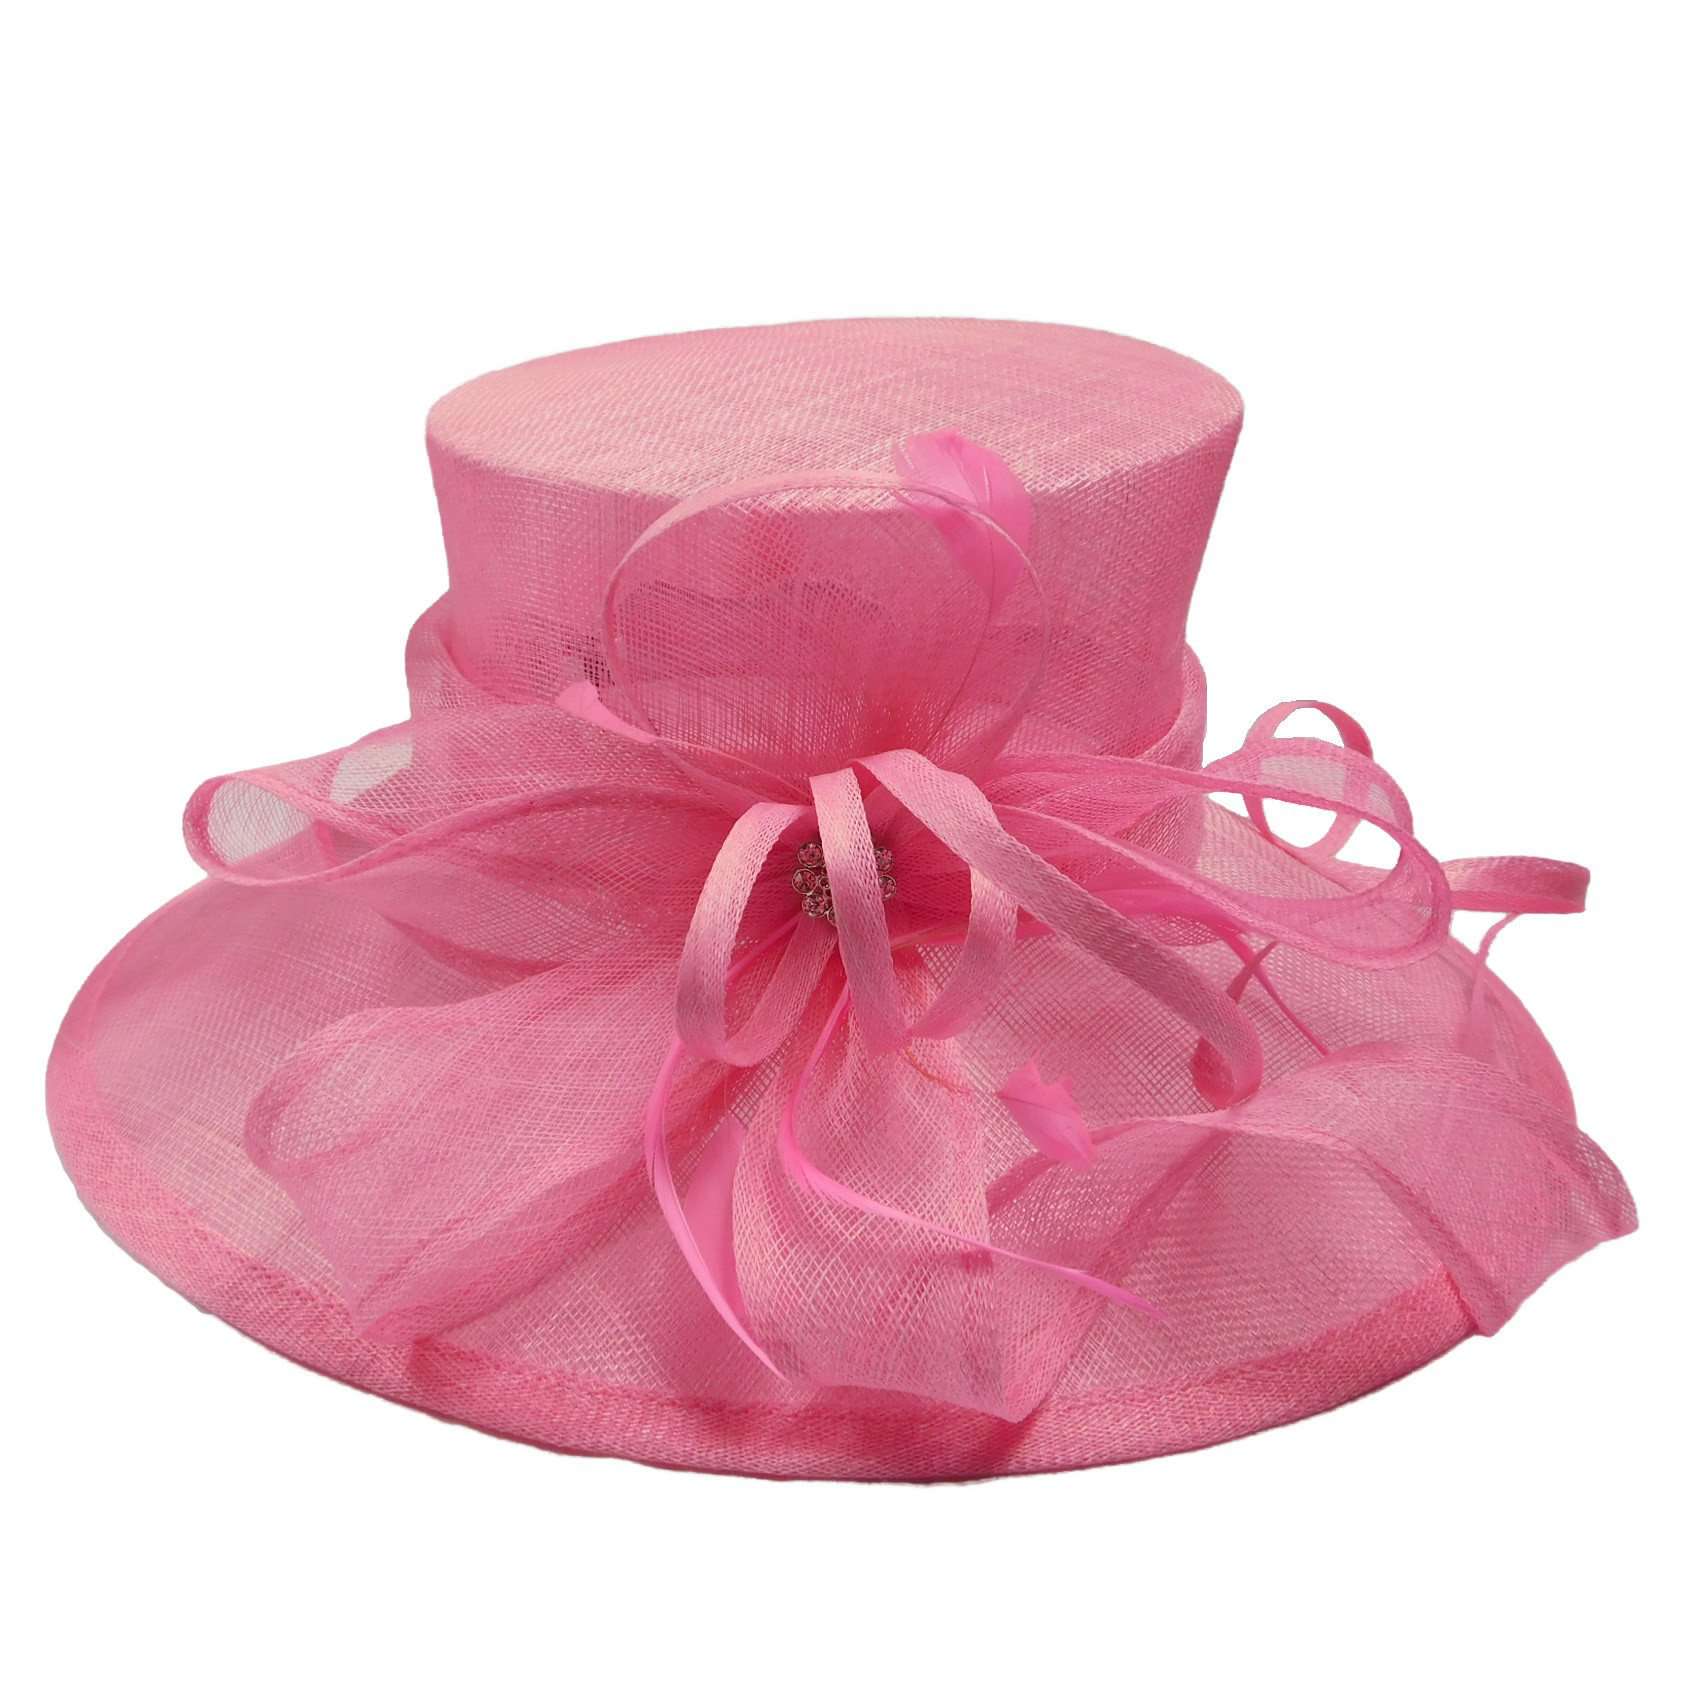 Large Sinamay Dress Hat with Bow Dress Hat Something Special LA WSSY772PK Pink  